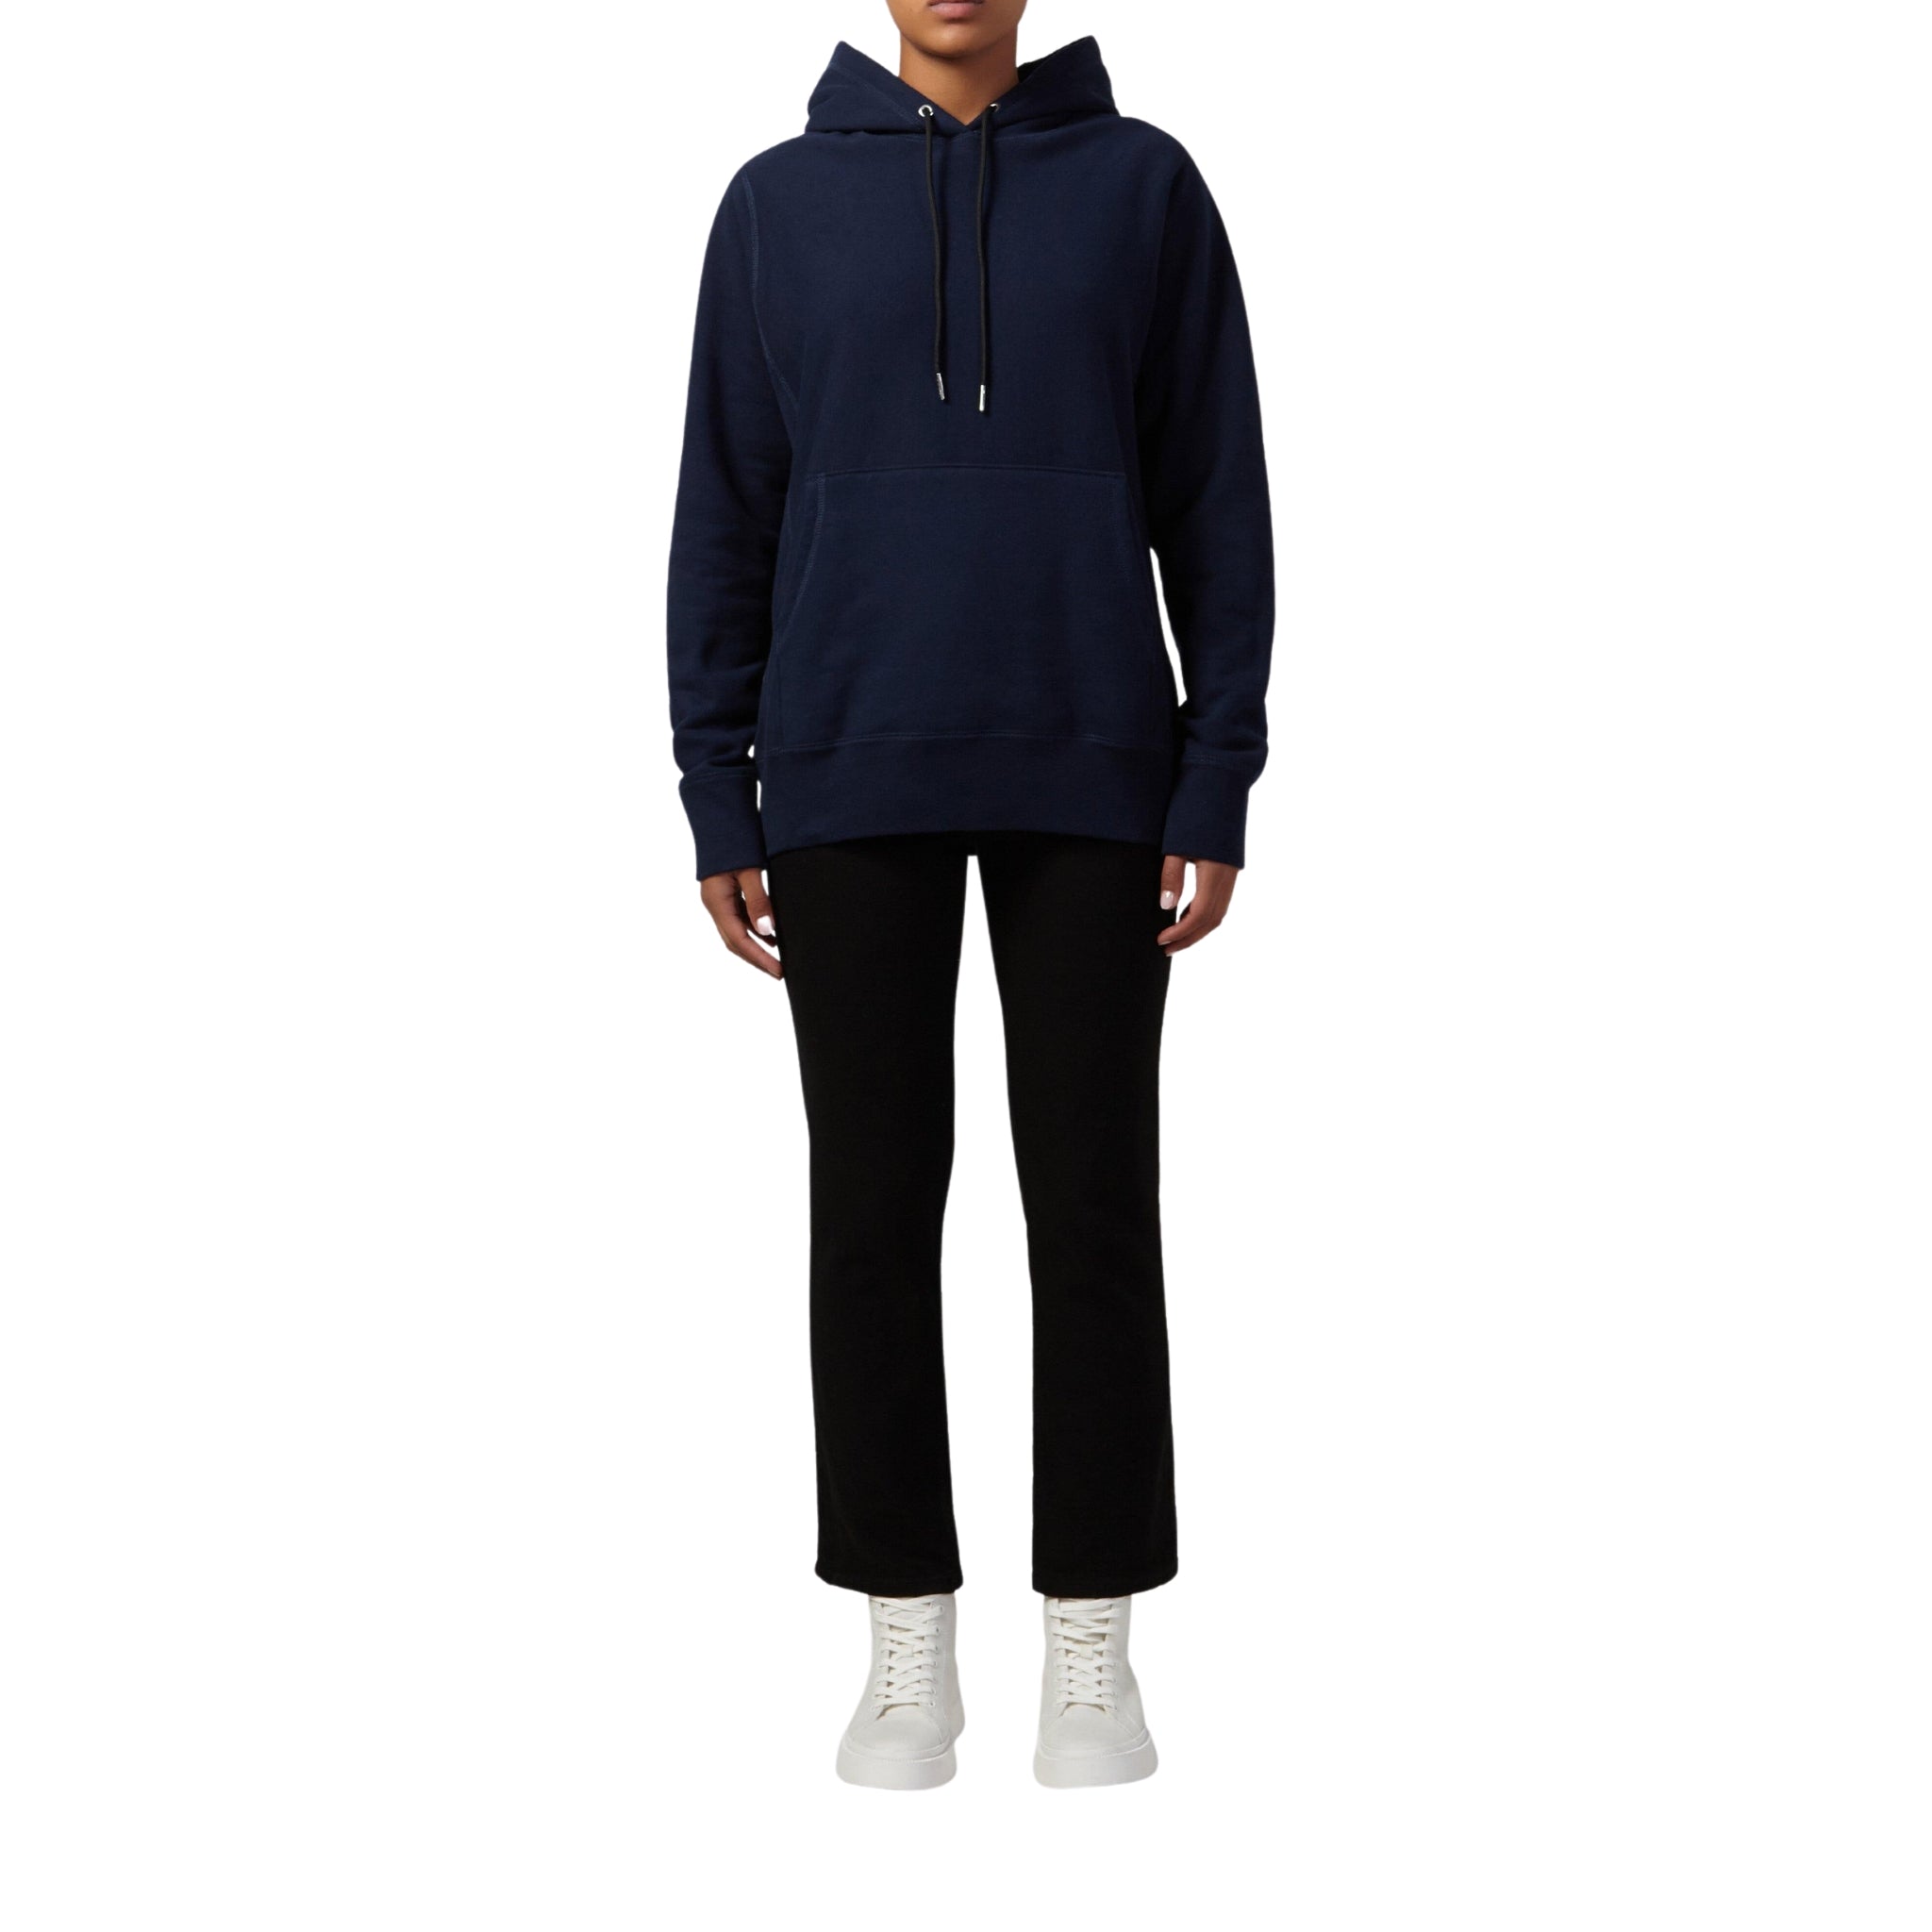 Female facing Front view of a Bedi' "second life" program navy hoodie against a white background